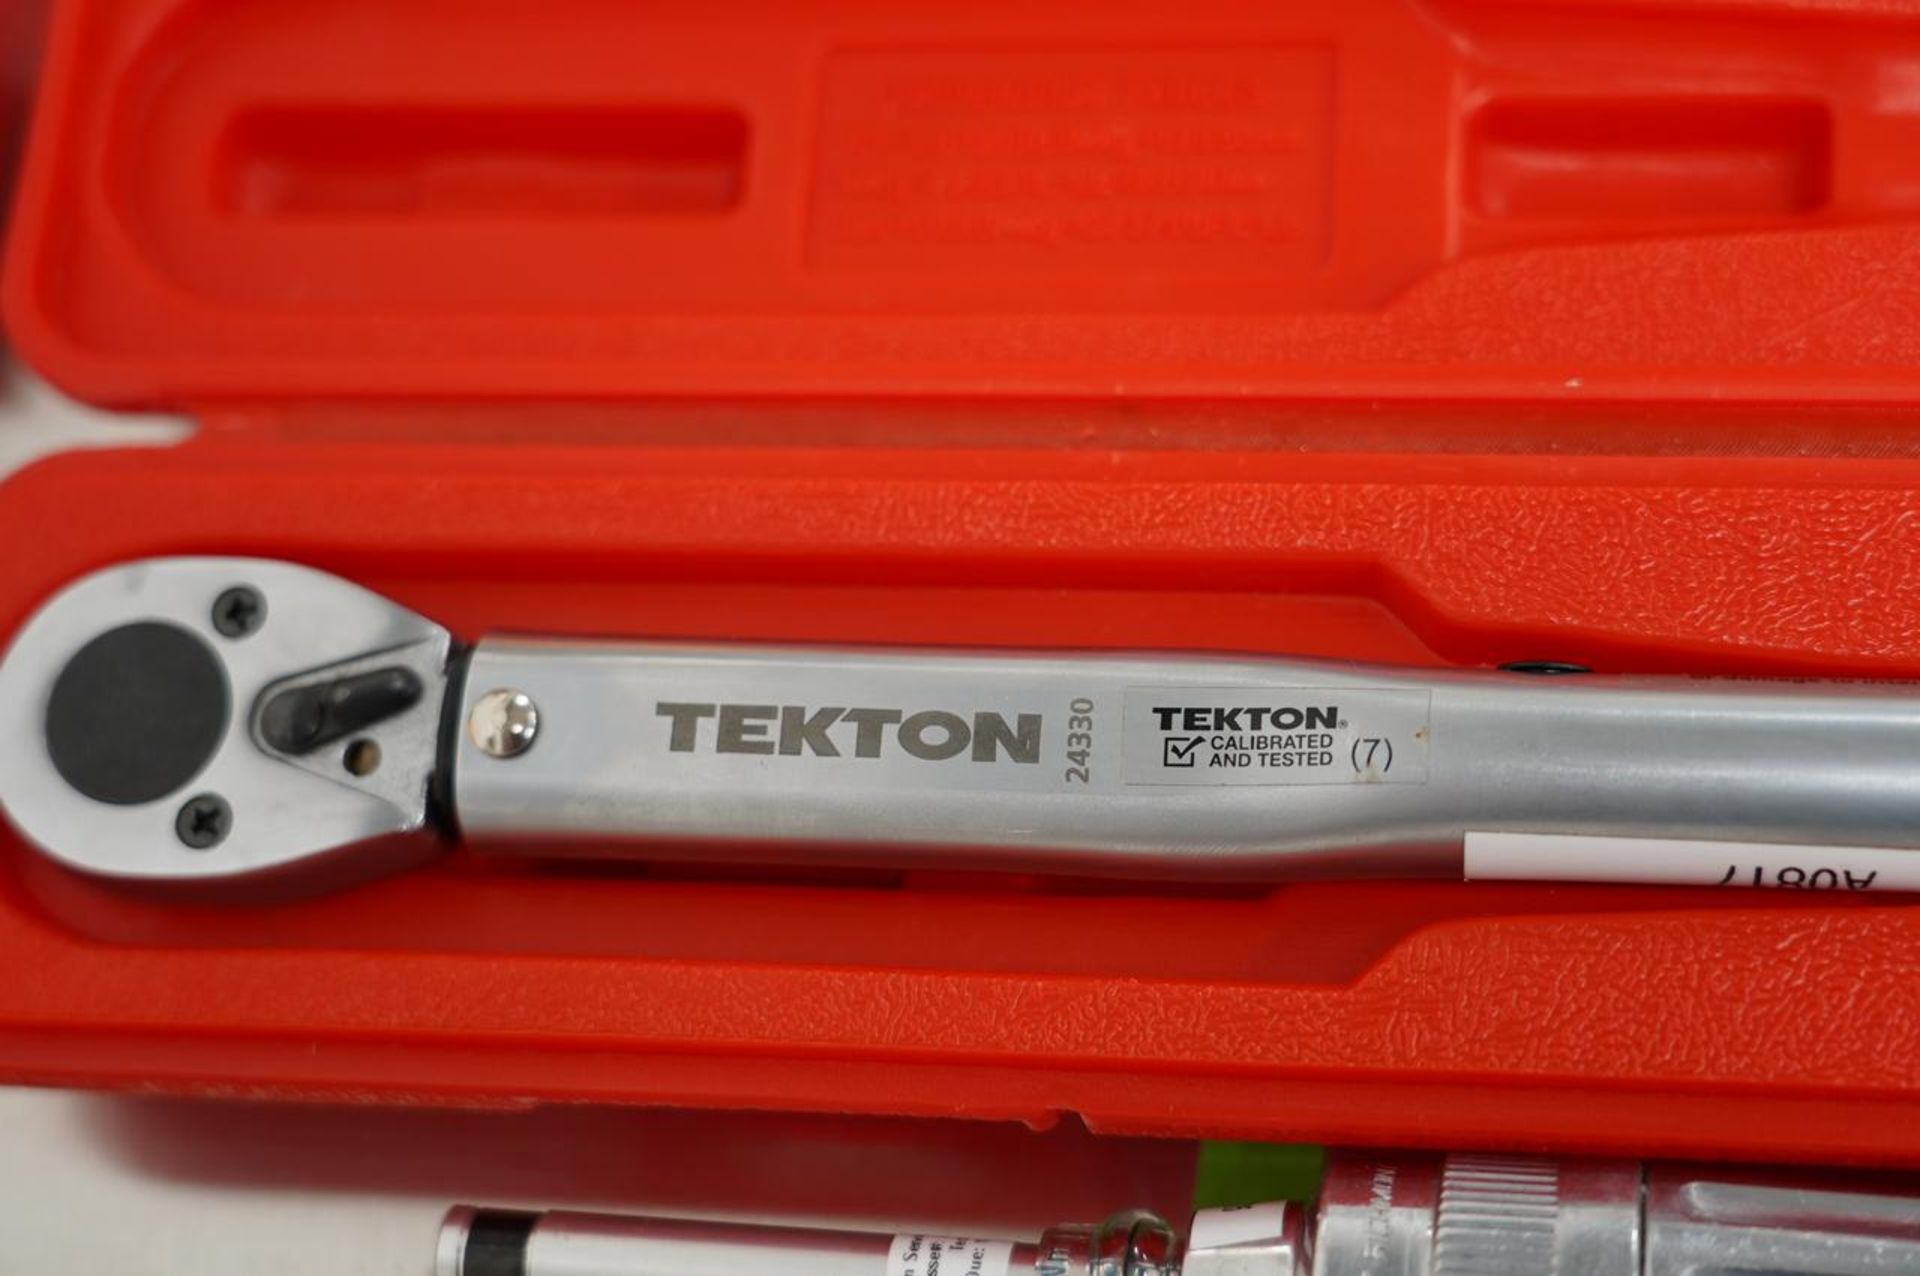 Sturtevant Richmont / Tekton (1) Torque Wrenches and (8) Torque Screwdrivers - Image 5 of 6